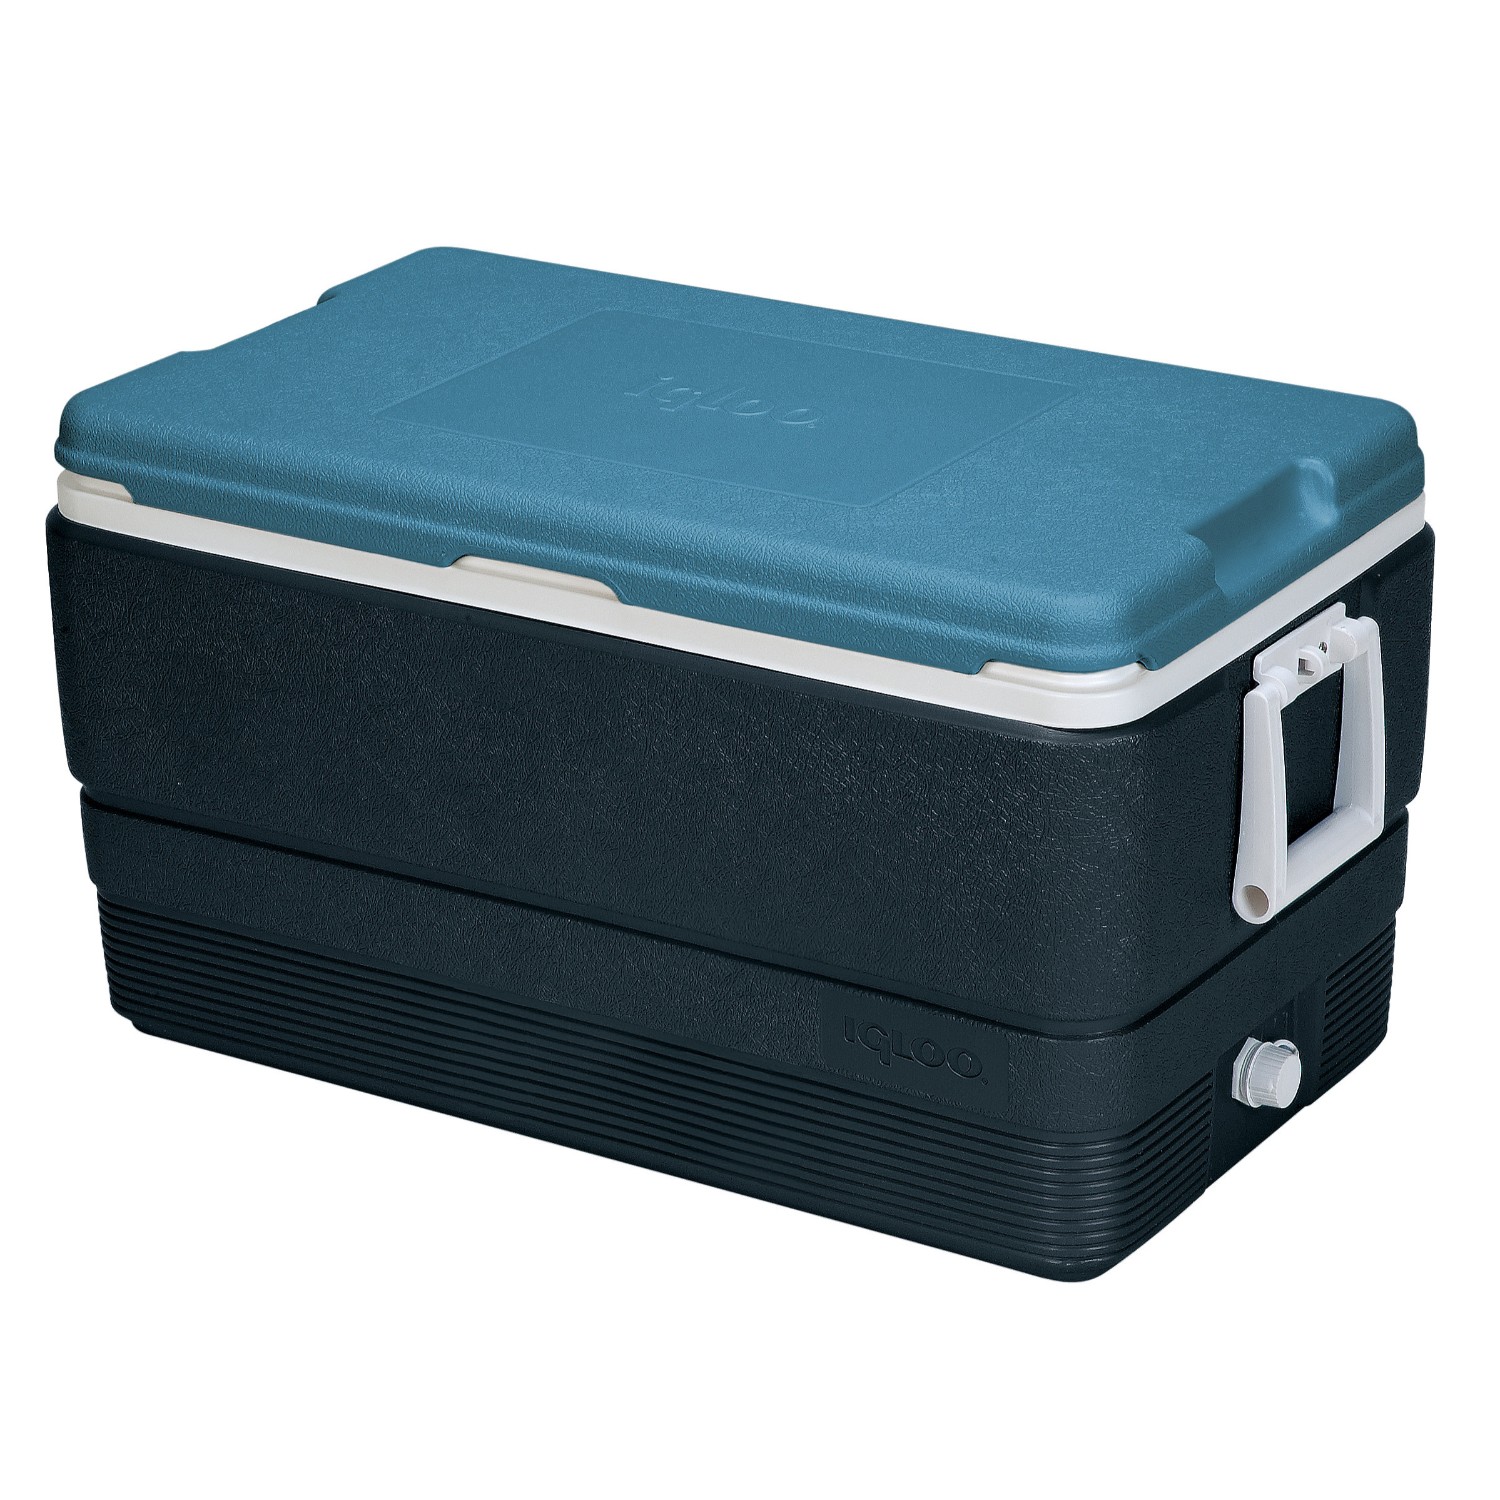 Igloo Maxcold 70 qt Hard Sided Cooler, Blue - image 1 of 4